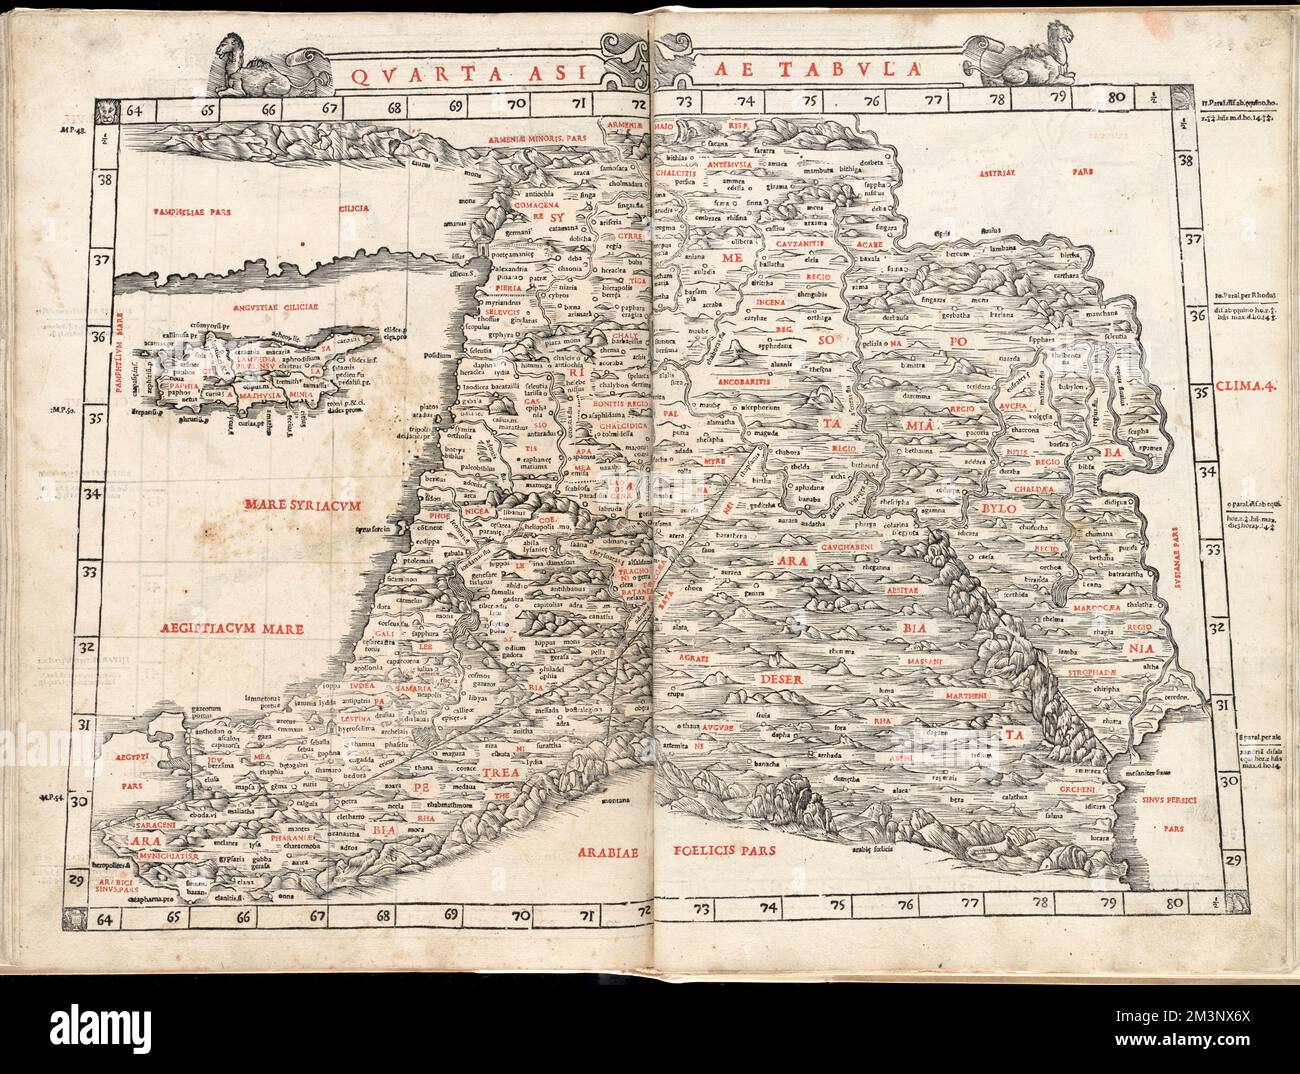 Quarta Asiae tabula , Israel, Karten, Early Works to 1800, Libanon, Karten, Early Works to 1800, Syrien, Karten, Early Works to 1800, Jordanien, Karten, Early Works to 1800, Irak, Karten, Early Works to 1800, Palästina, Karten, Early Works to 1800 Norman B. Leventhal Map Center Collection Stockfoto